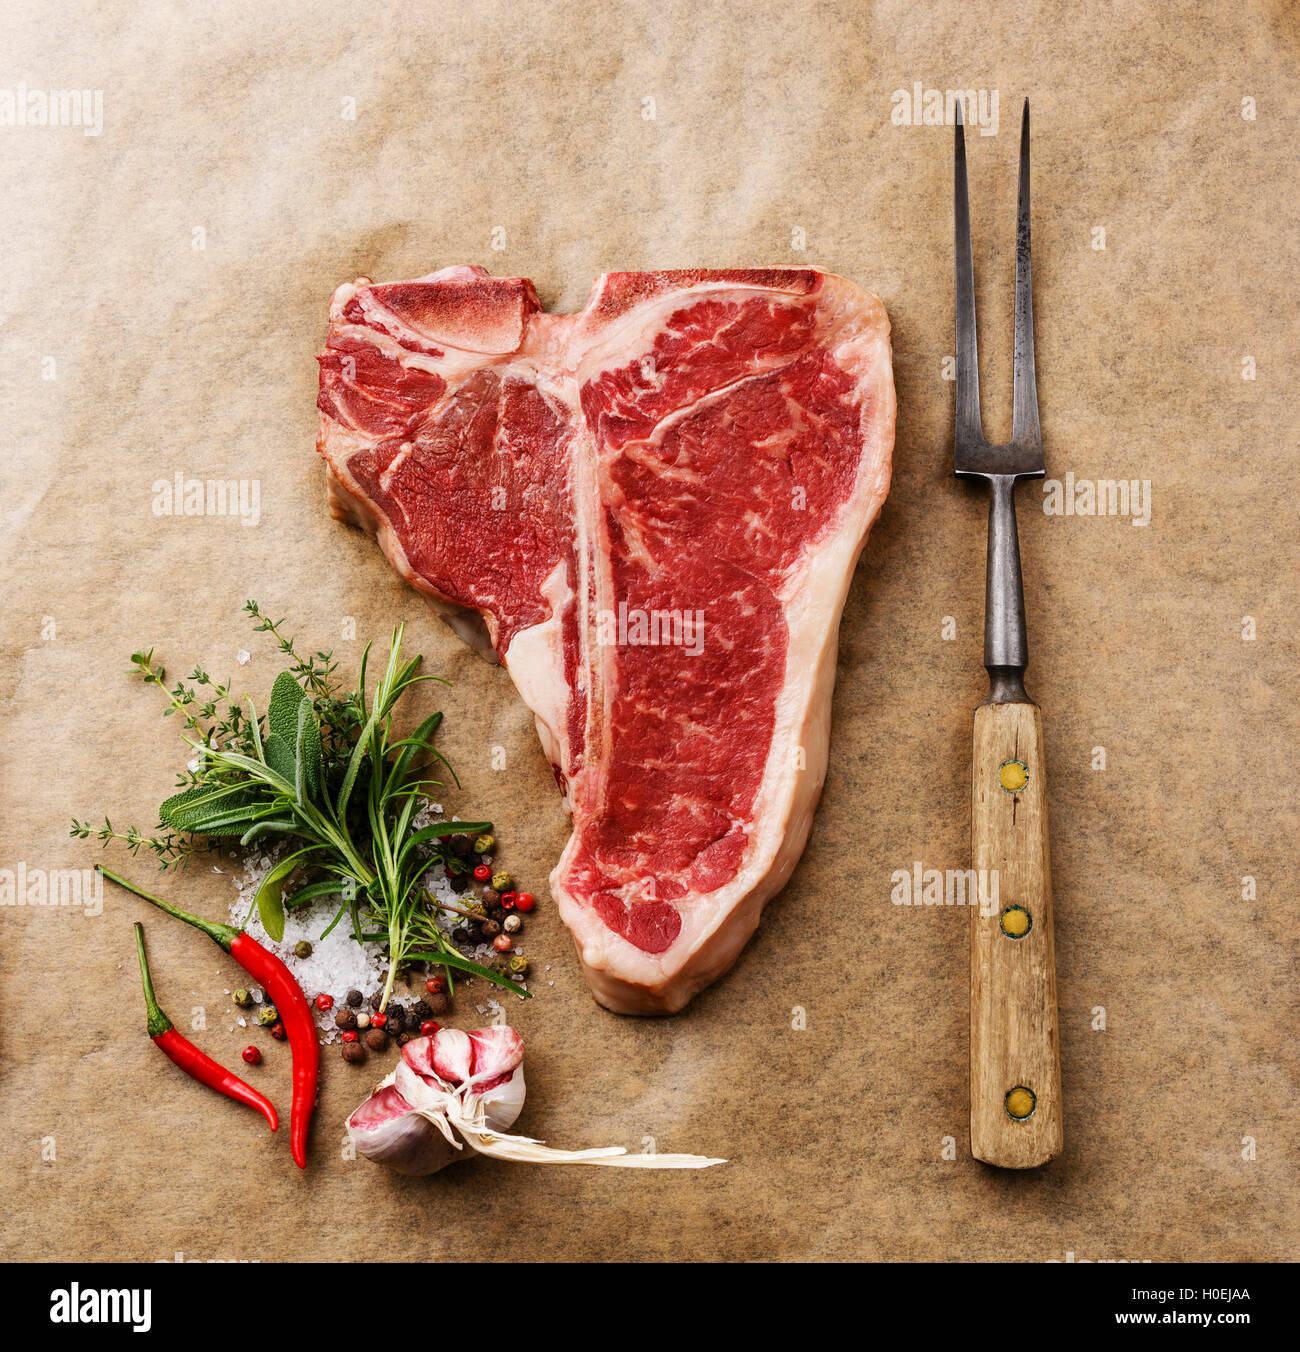 Raw fresh meat T-bone steak, seasoning and meat fork on cooking paper background Stock Photo